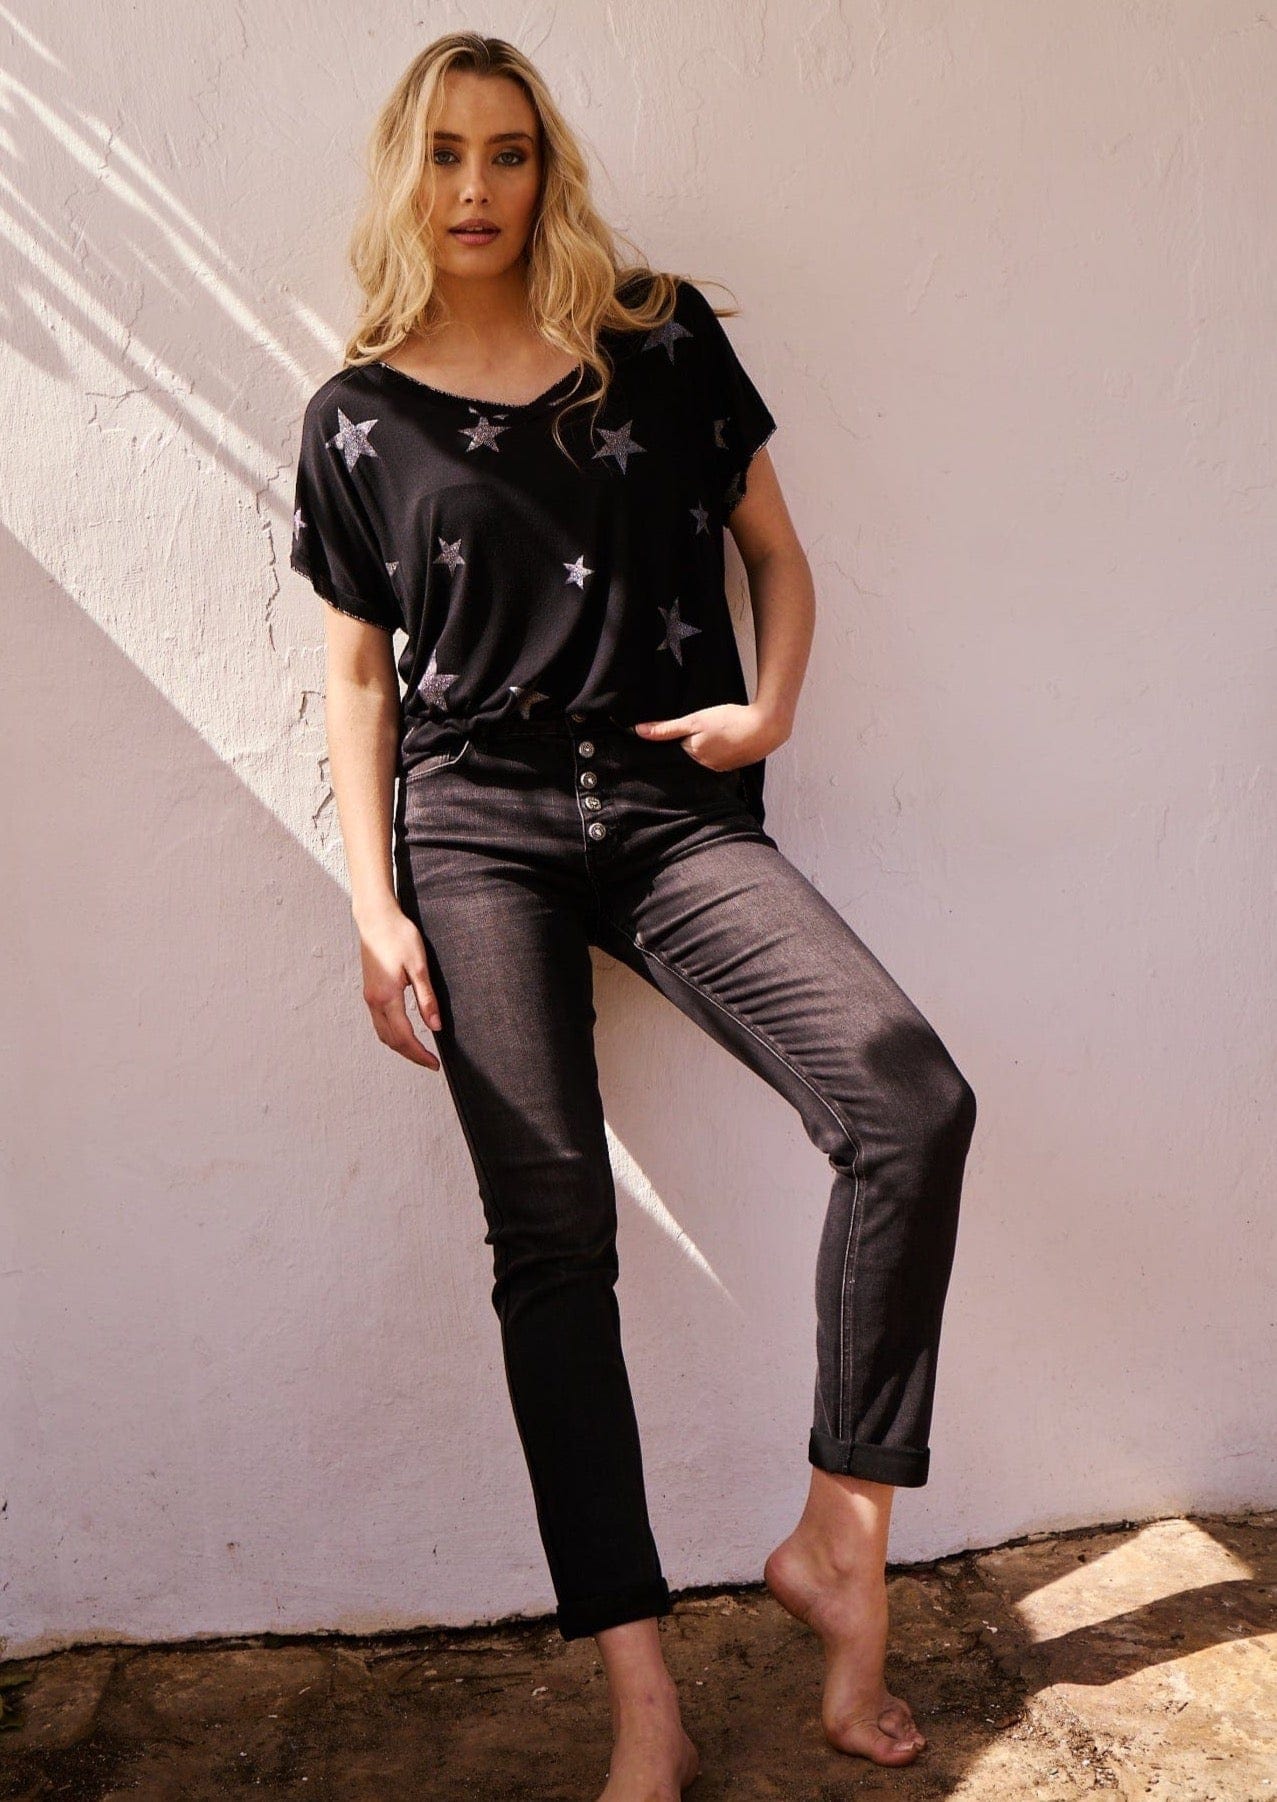 High-Rise Black Denim Jeans with Front Buttons - Tribute StoreTRIBUTE